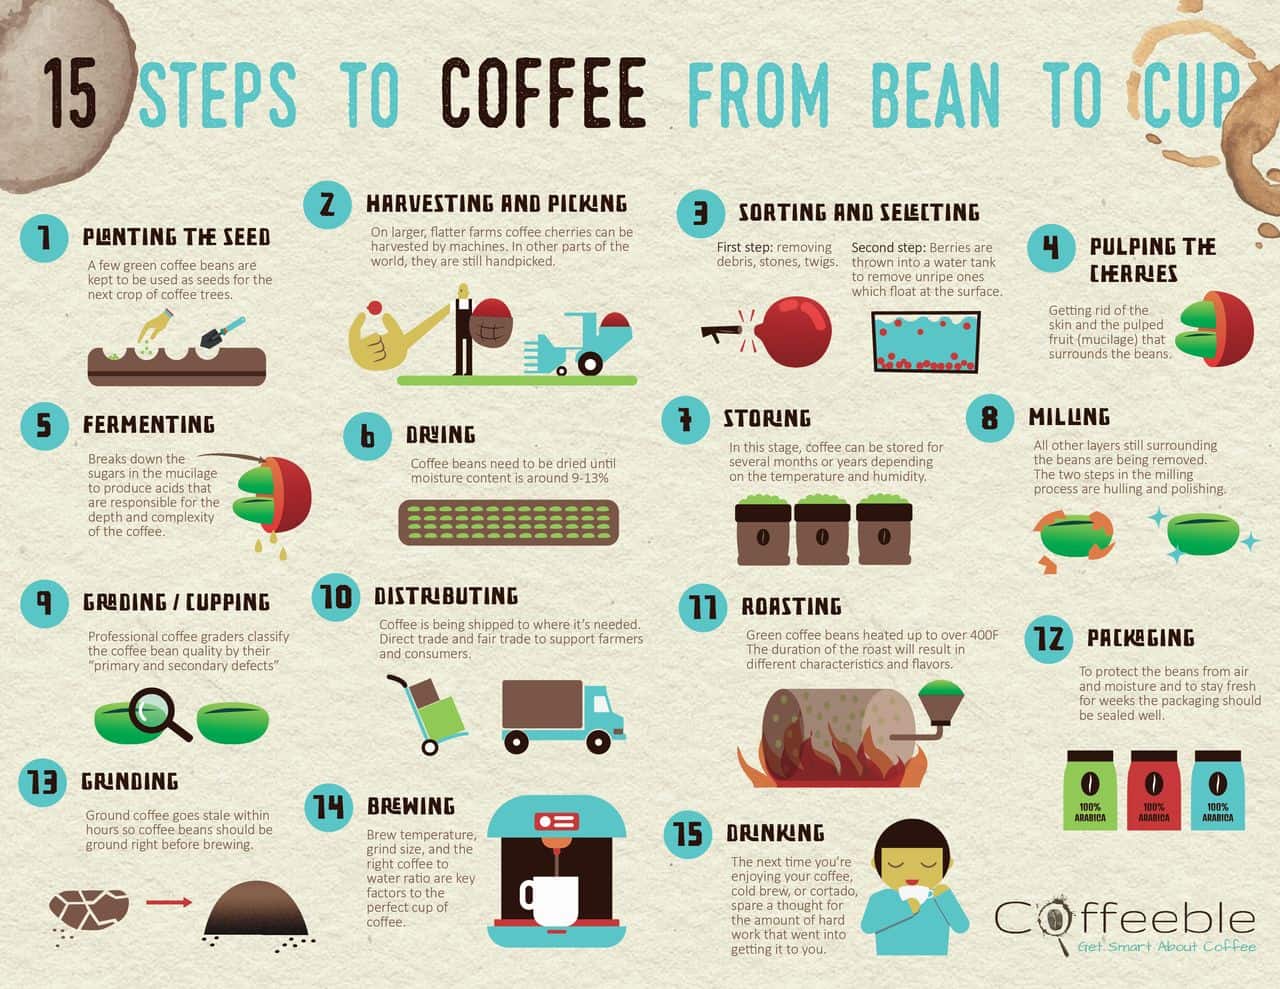 How coffee is produced?